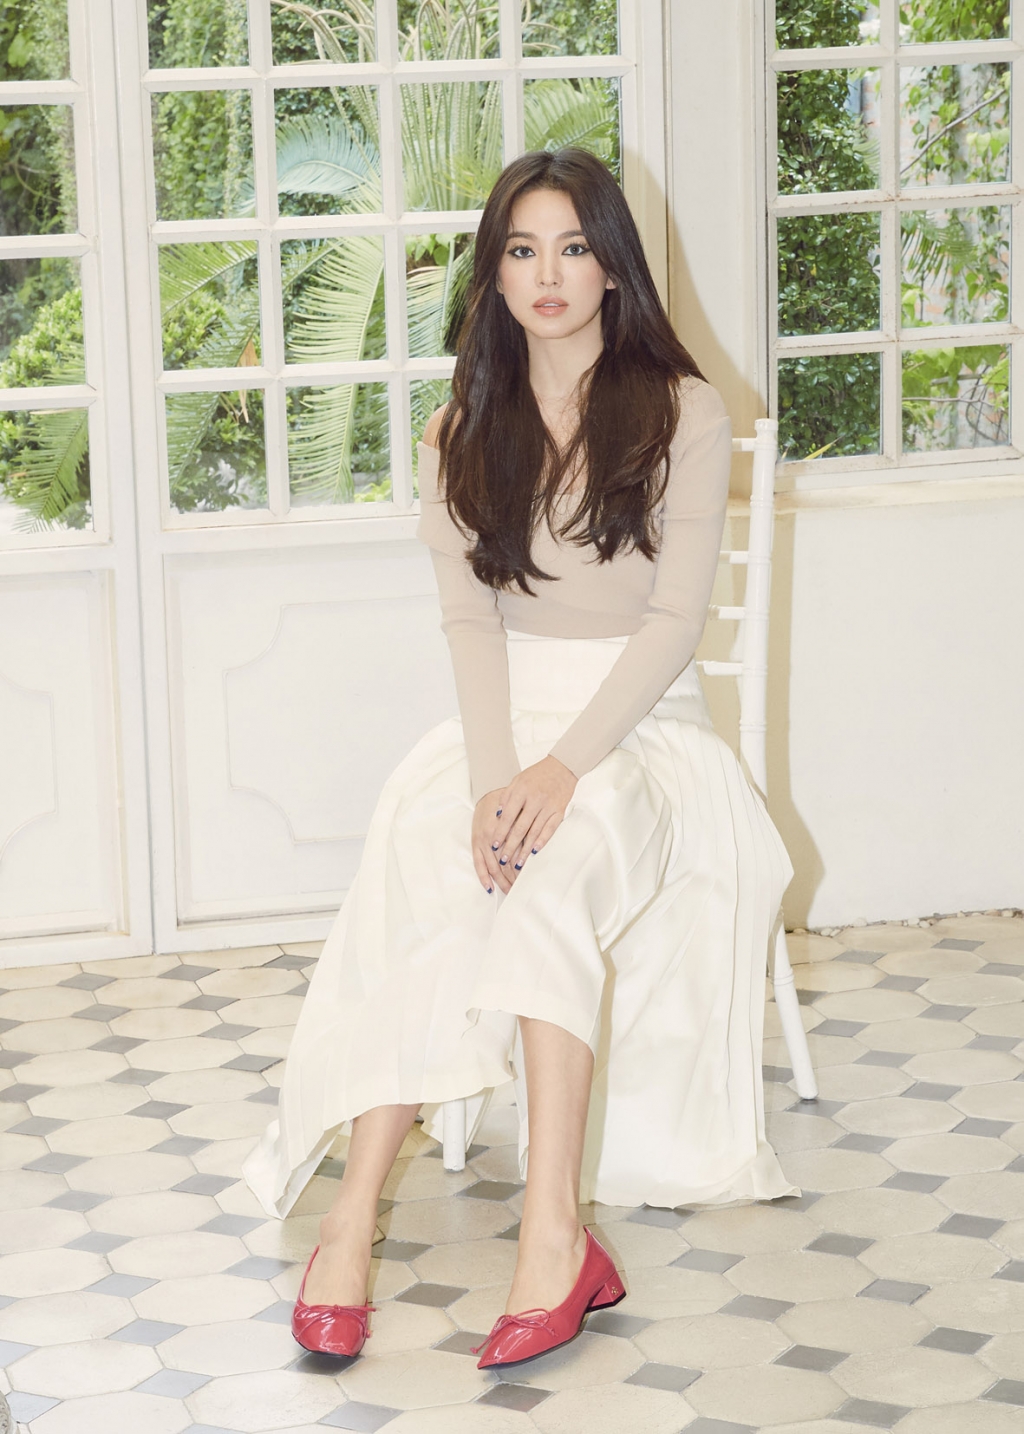 Actor Song Hye-kyo showed chic makeup and lovely style in the picture.The contemporary shoes brand Shucomma Bonnie, developed by Kolon Industries FnC (hereinafter referred to as Kolon FnC), released a campaign picture on the 19th with SHINE ON ME with Muse Song Hye-kyo for the 2019 F/W season.Shucomma Bonnie expressed a woman who can enjoy and enjoy her style by herself through the brand Muse Song Hye-kyo and various design shoes.Song Hye-kyo in the picture matched the beige knit and white long skirt with the shoulder line, matching the lovely color shoes, the neat white blouse and the mint pants with the splashing sneakers.Shoes made by Song Hye-kyo in the picture are made of soft sheepskin material, and it is a coy with comfortable grip and knitwear high line.On the other hand, Shucomma Bonnie will hold a Queens Snickers Early Bird Promotion, which will present a discount coupon of 30,000 won at Kolon Mall and Shucomma Bonnie offline store, until September 1 to commemorate the release of the SHINE ON ME campaign.